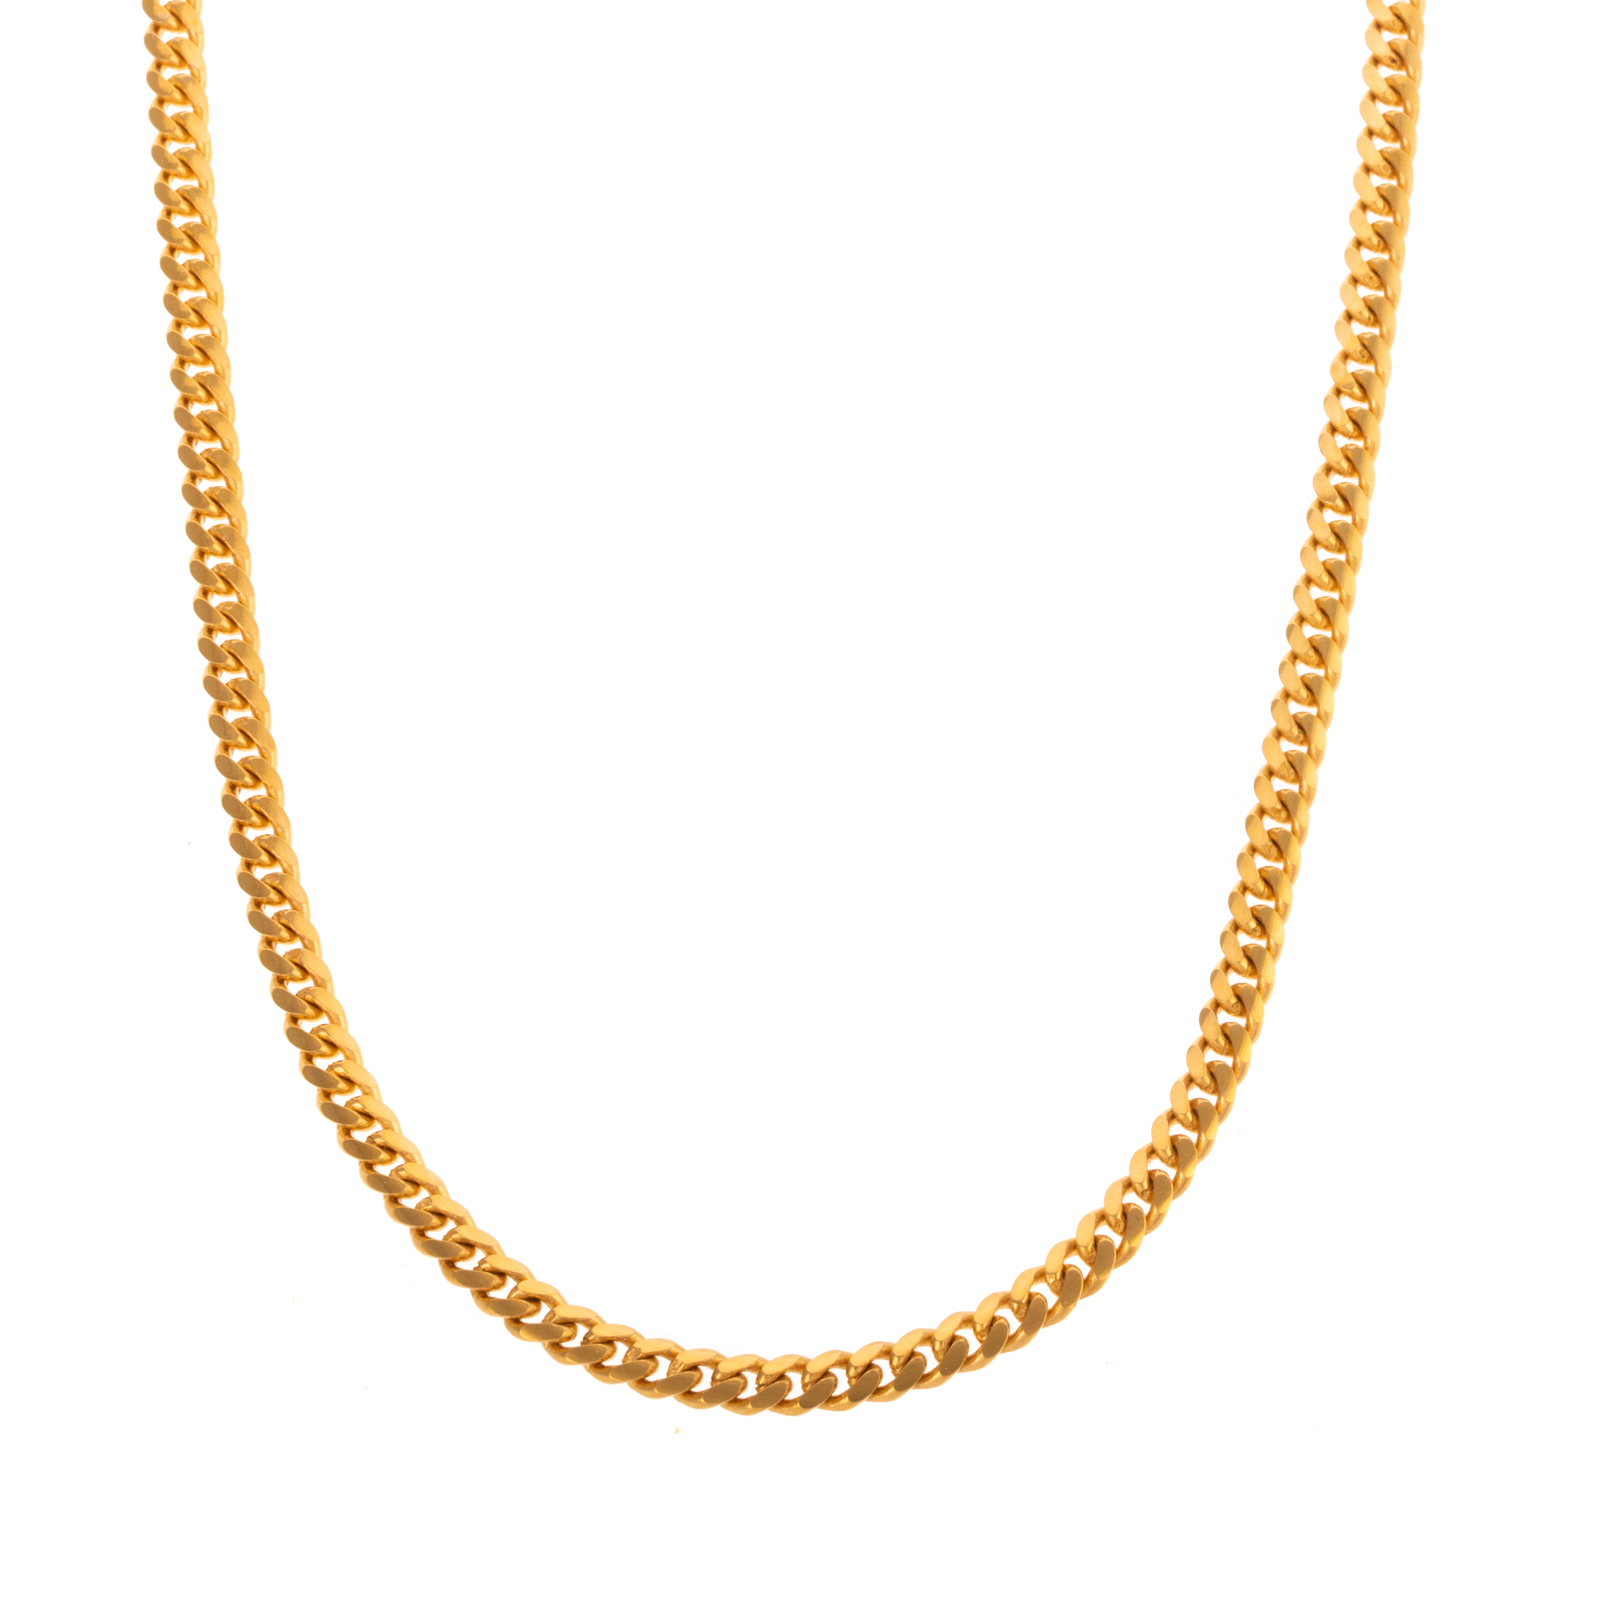 A SOLID 18K CURB LINK NECKLACE